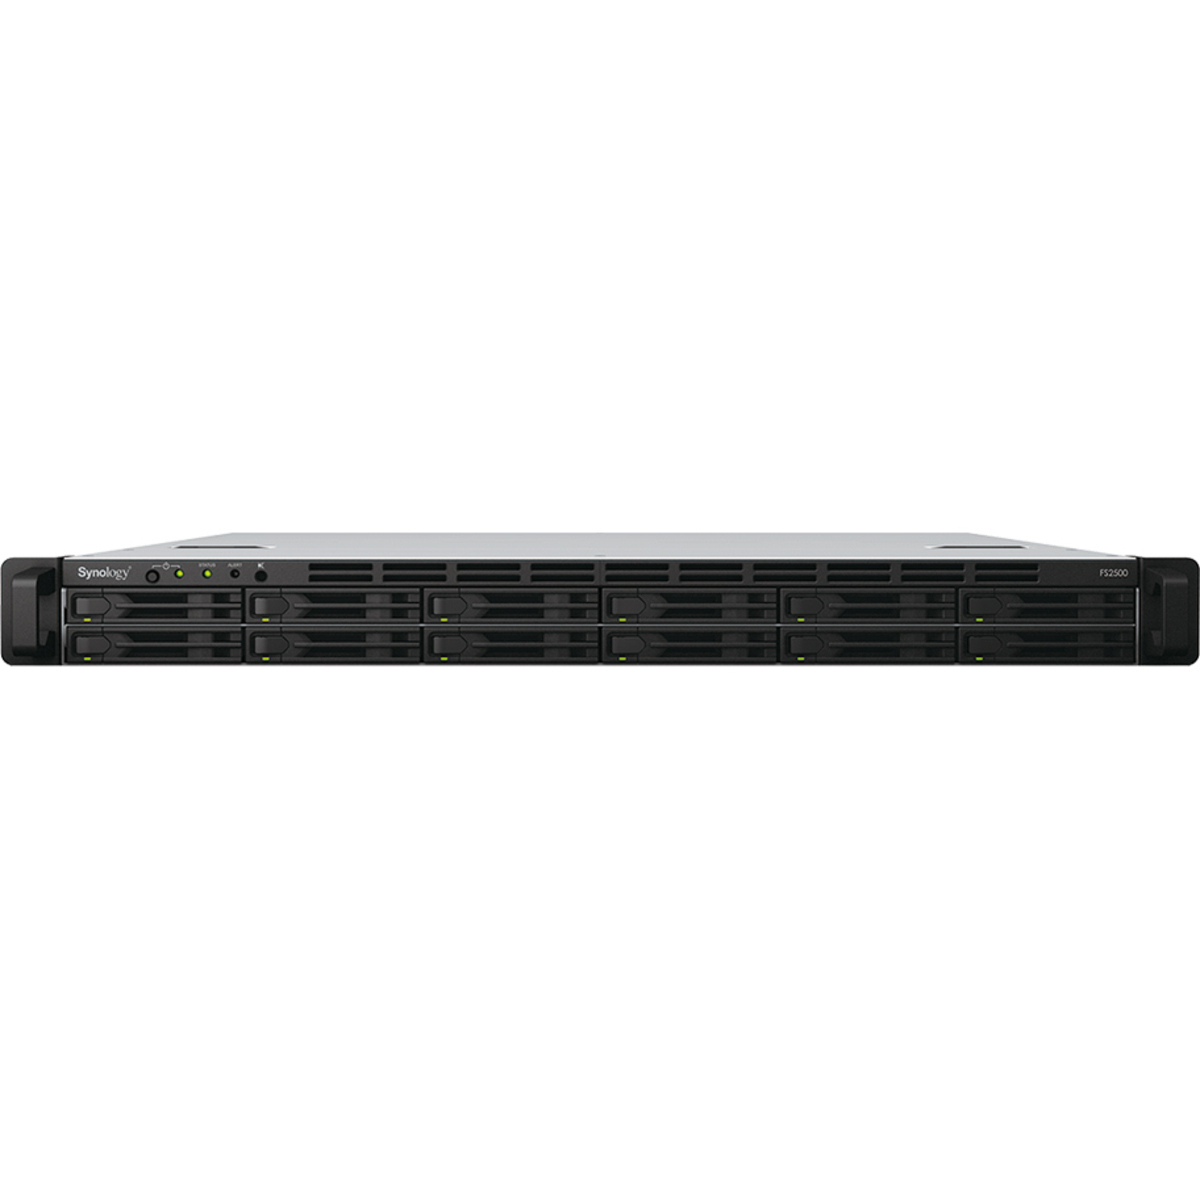 Synology FlashStation FS2500 10.5tb 12-Bay RackMount Large Business / Enterprise NAS - Network Attached Storage Device 11x960gb Synology SAT5210 Series SAT5210-960G 2.5 530/500MB/s SATA 6Gb/s SSD ENTERPRISE Class Drives Installed - Burn-In Tested - FREE RAM UPGRADE FlashStation FS2500